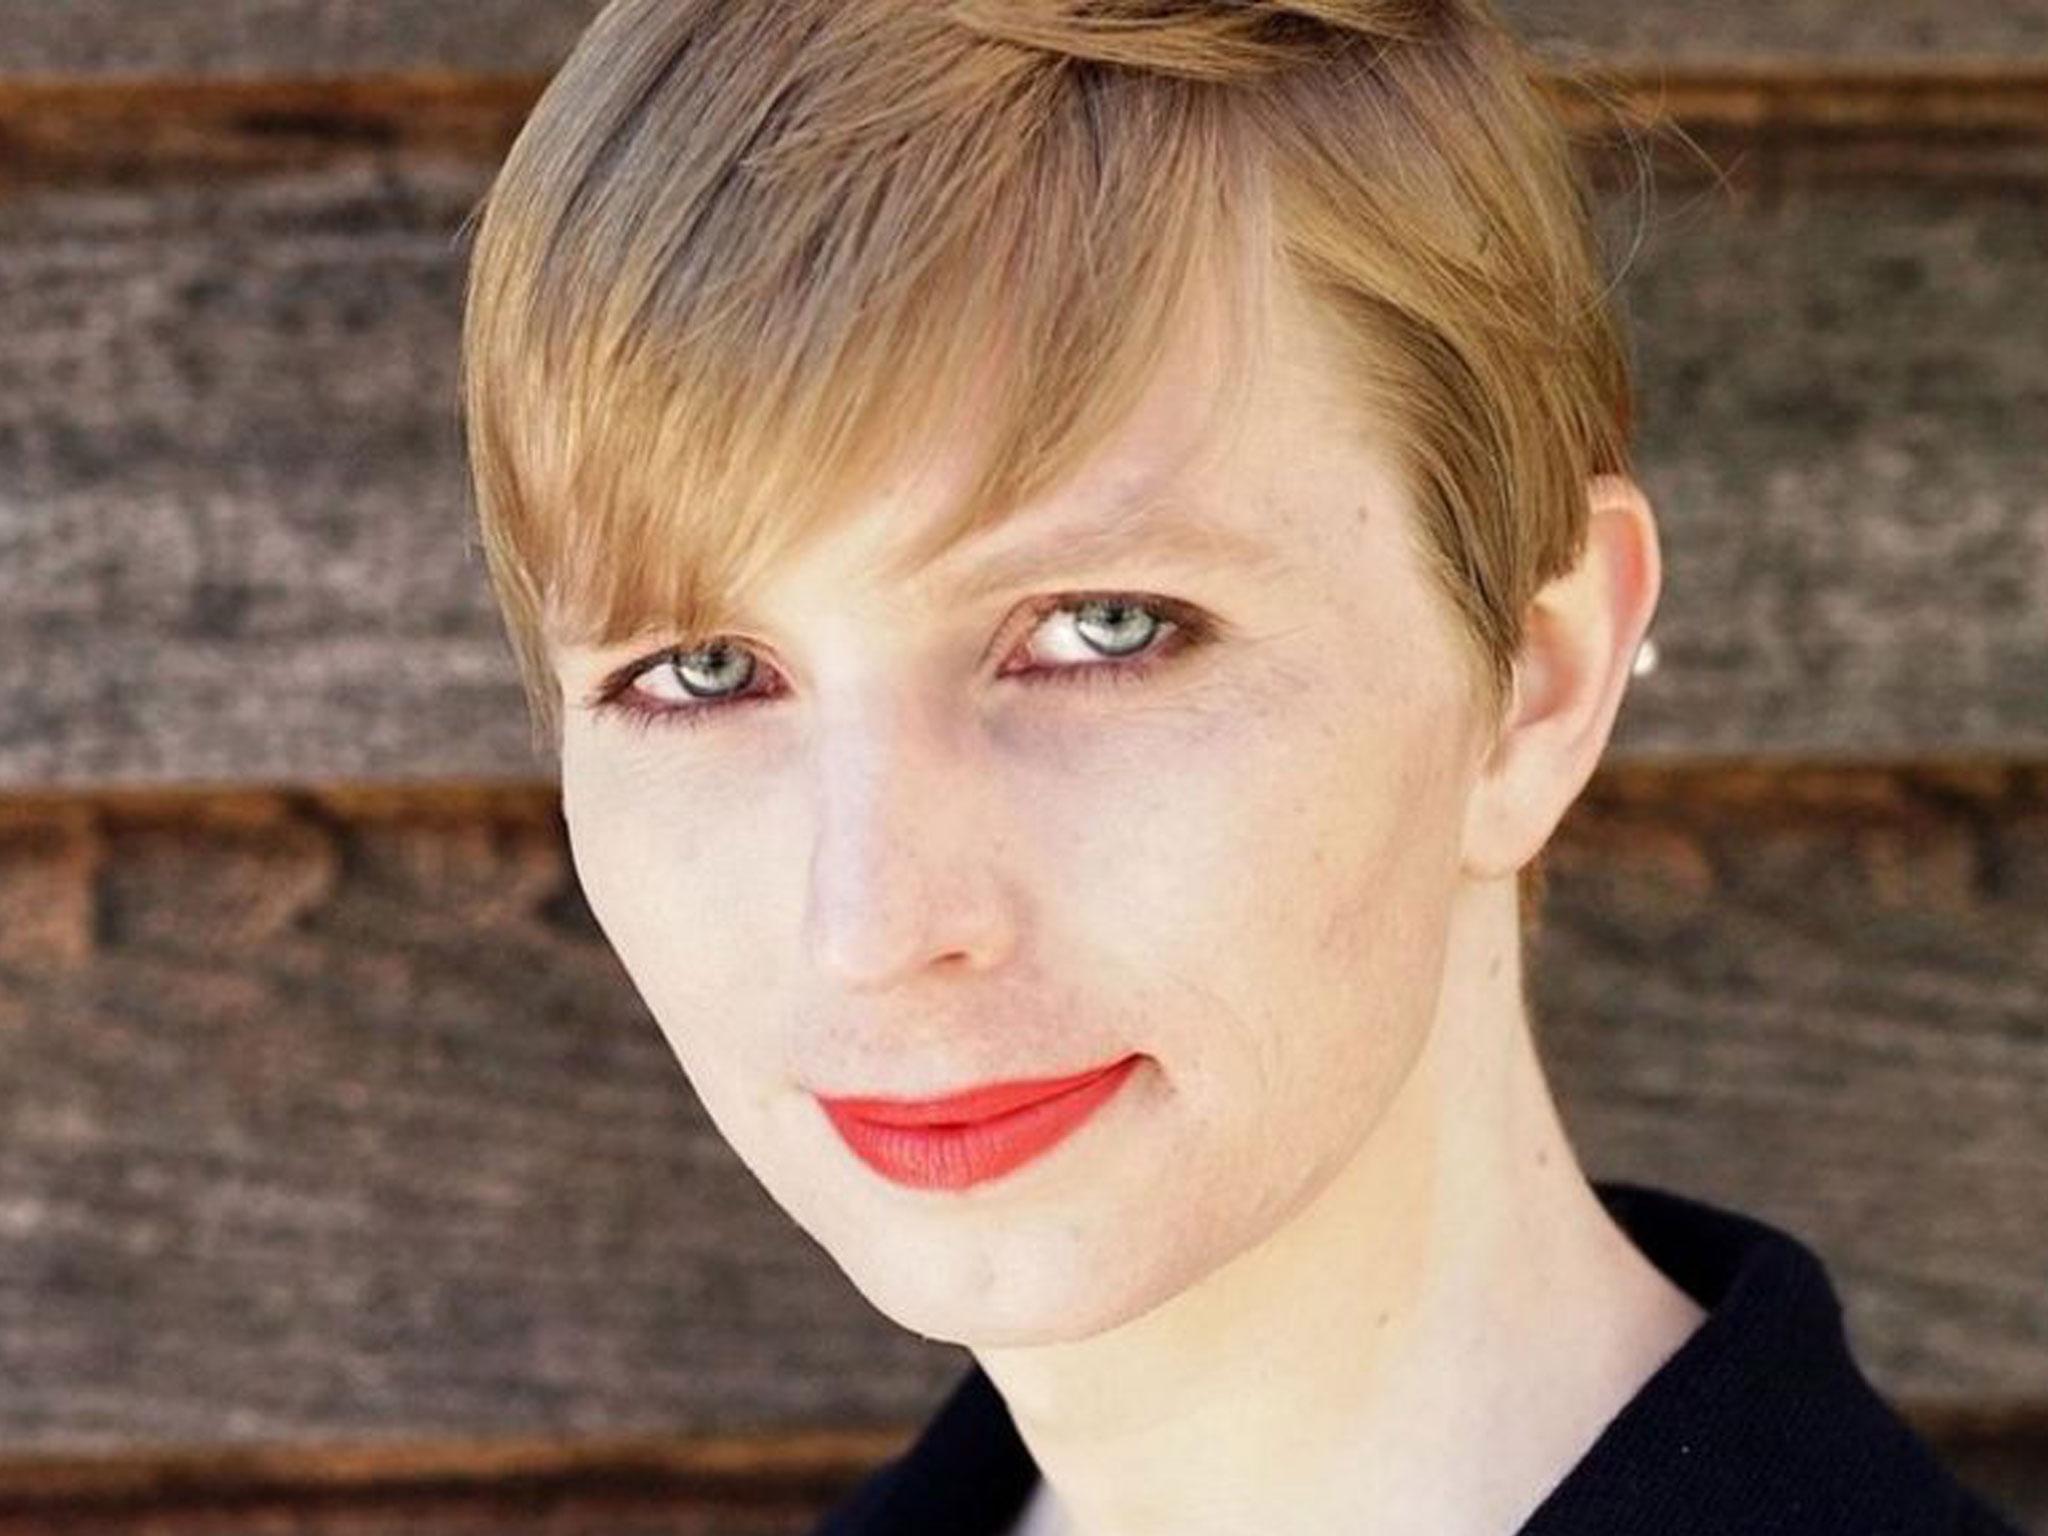 A newly-public government report says that Chelsea Manning's leak of classified documents did not cause major damage to US national security